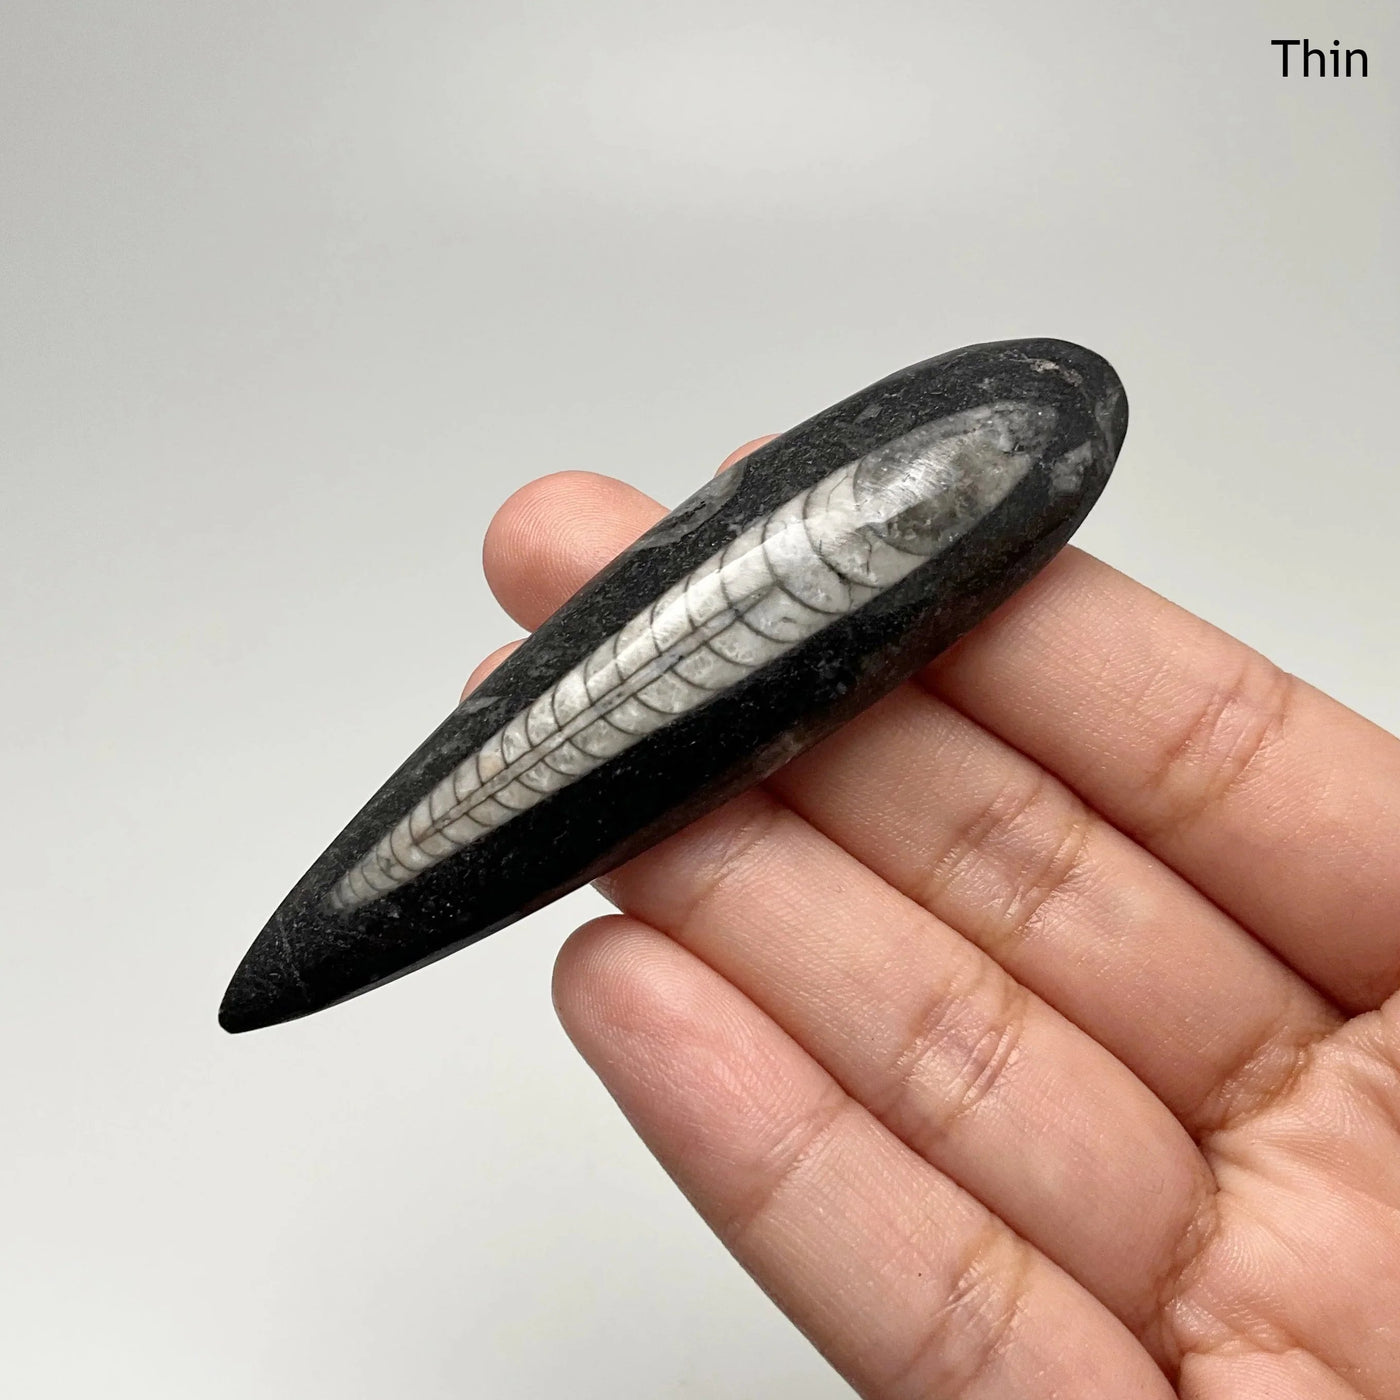 Small Polished Orthoceras Fossil